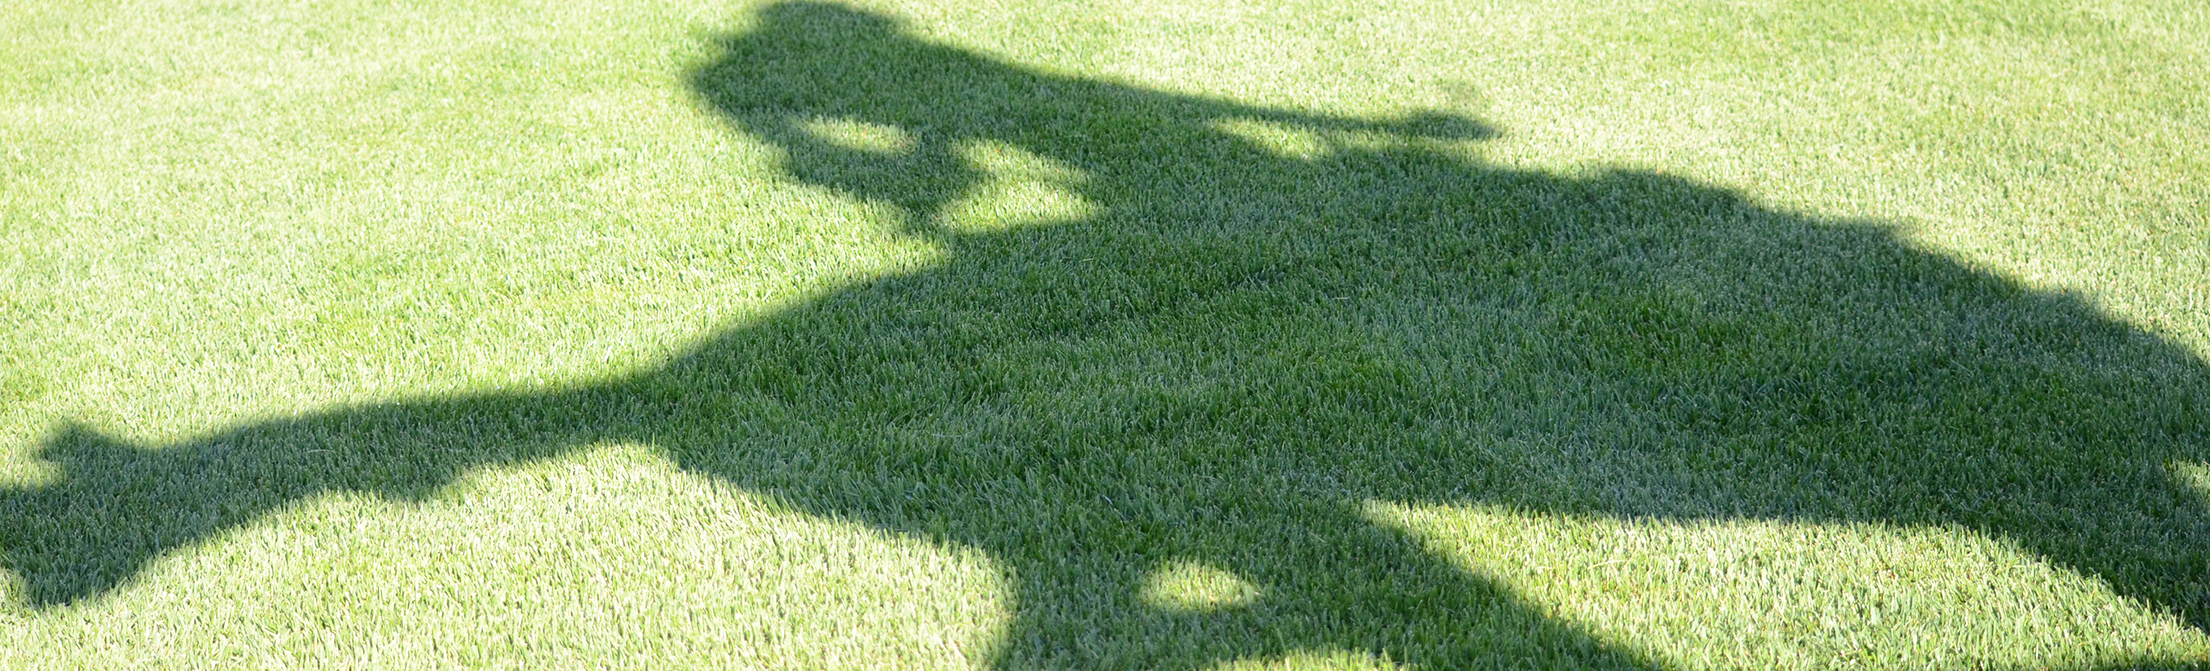 shadow of steamboat on grass